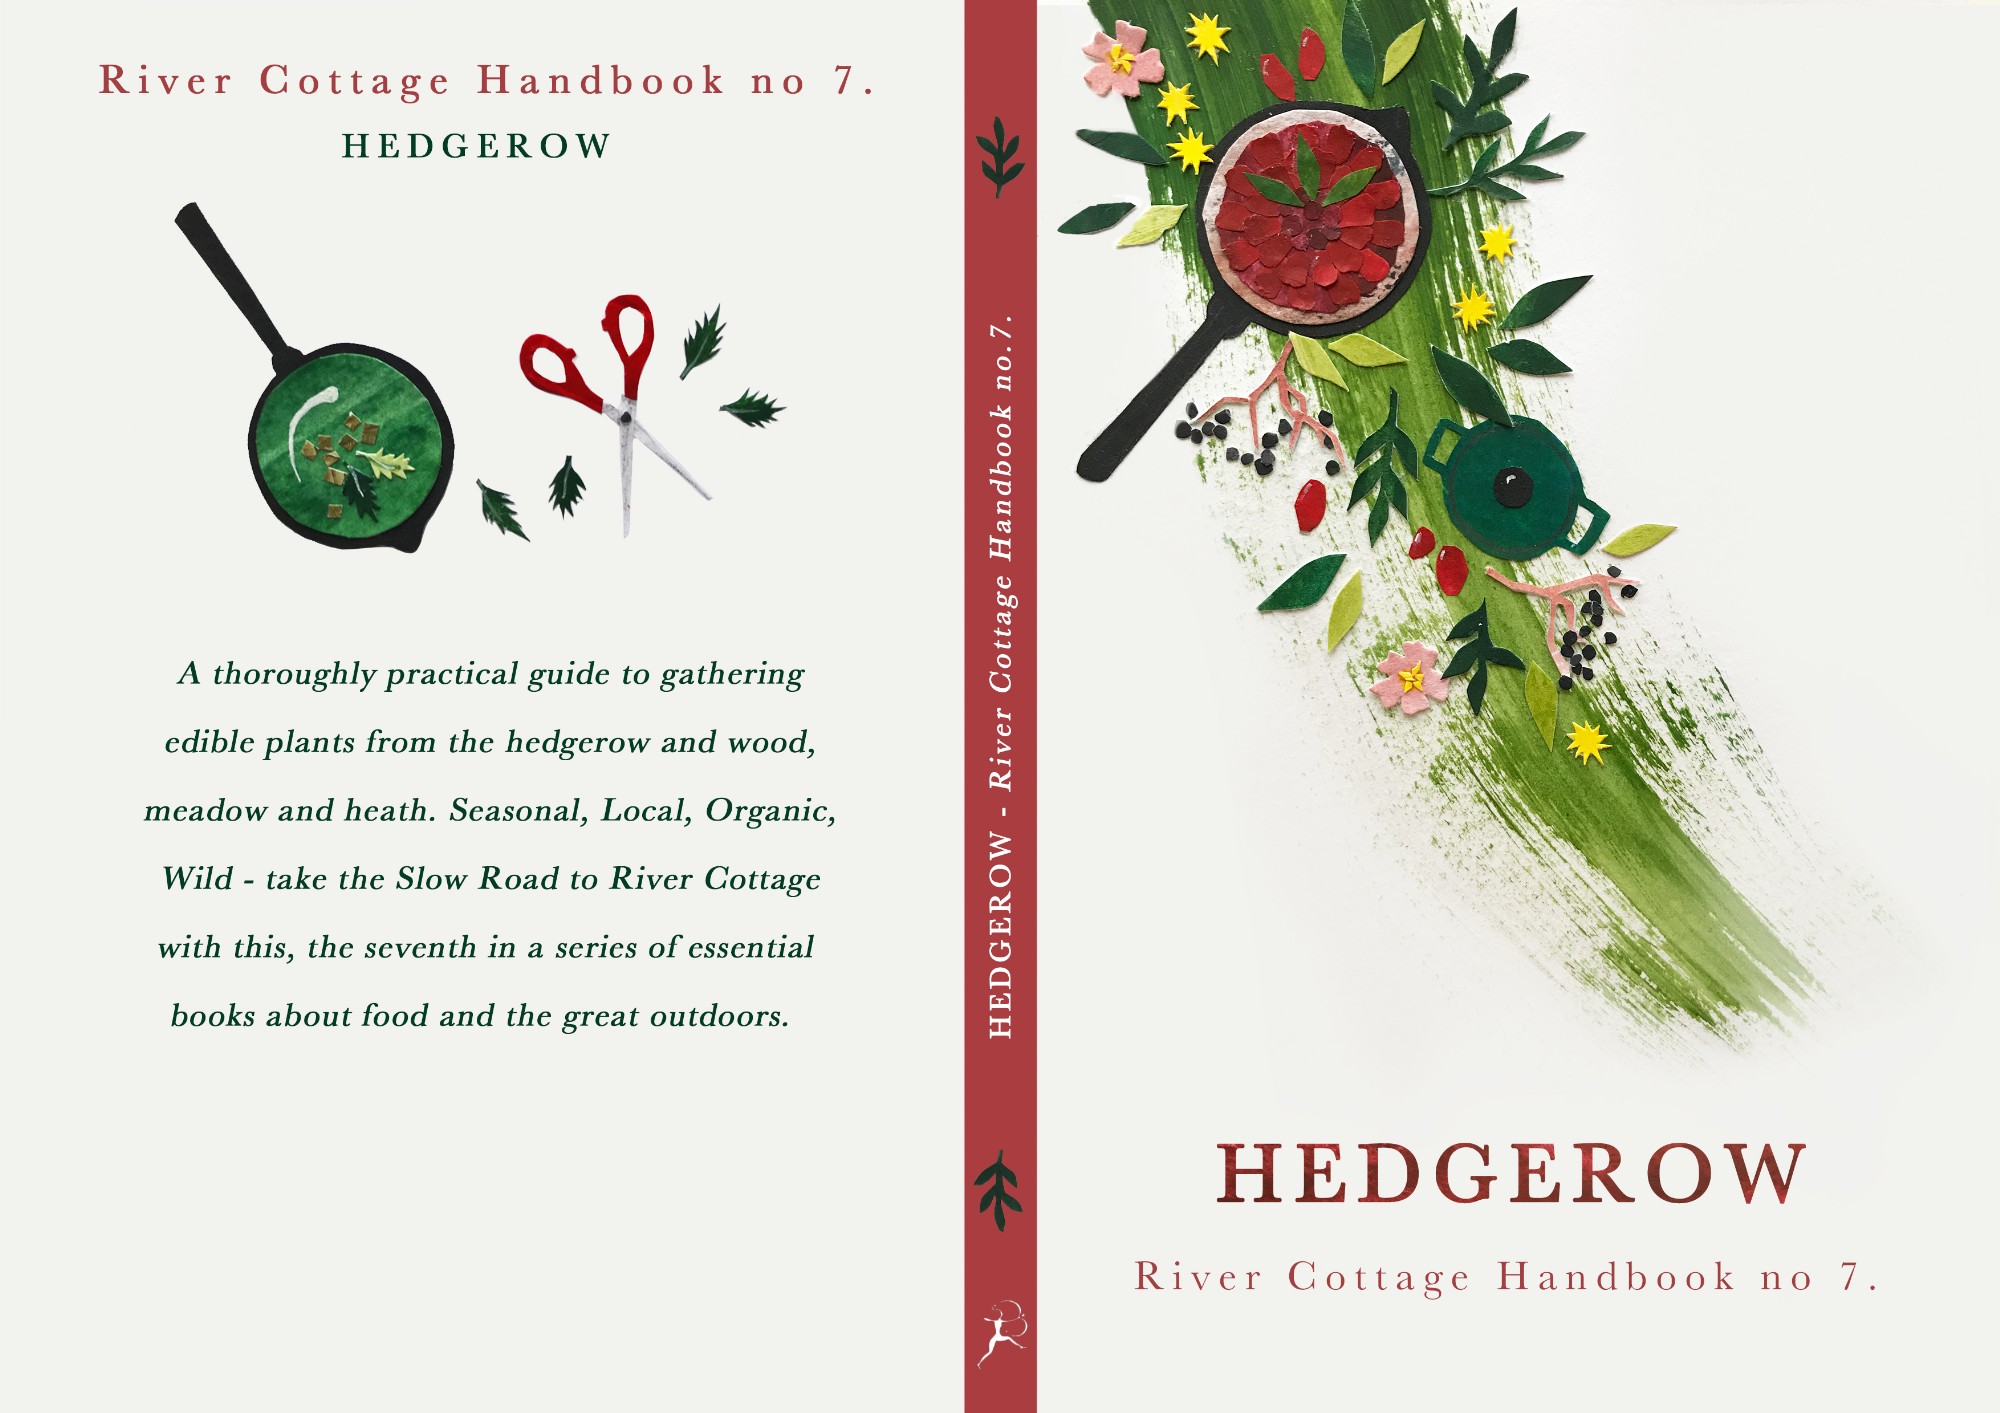 Speculative cookery book cover design, based on foraging and cooking from the hedgerows.